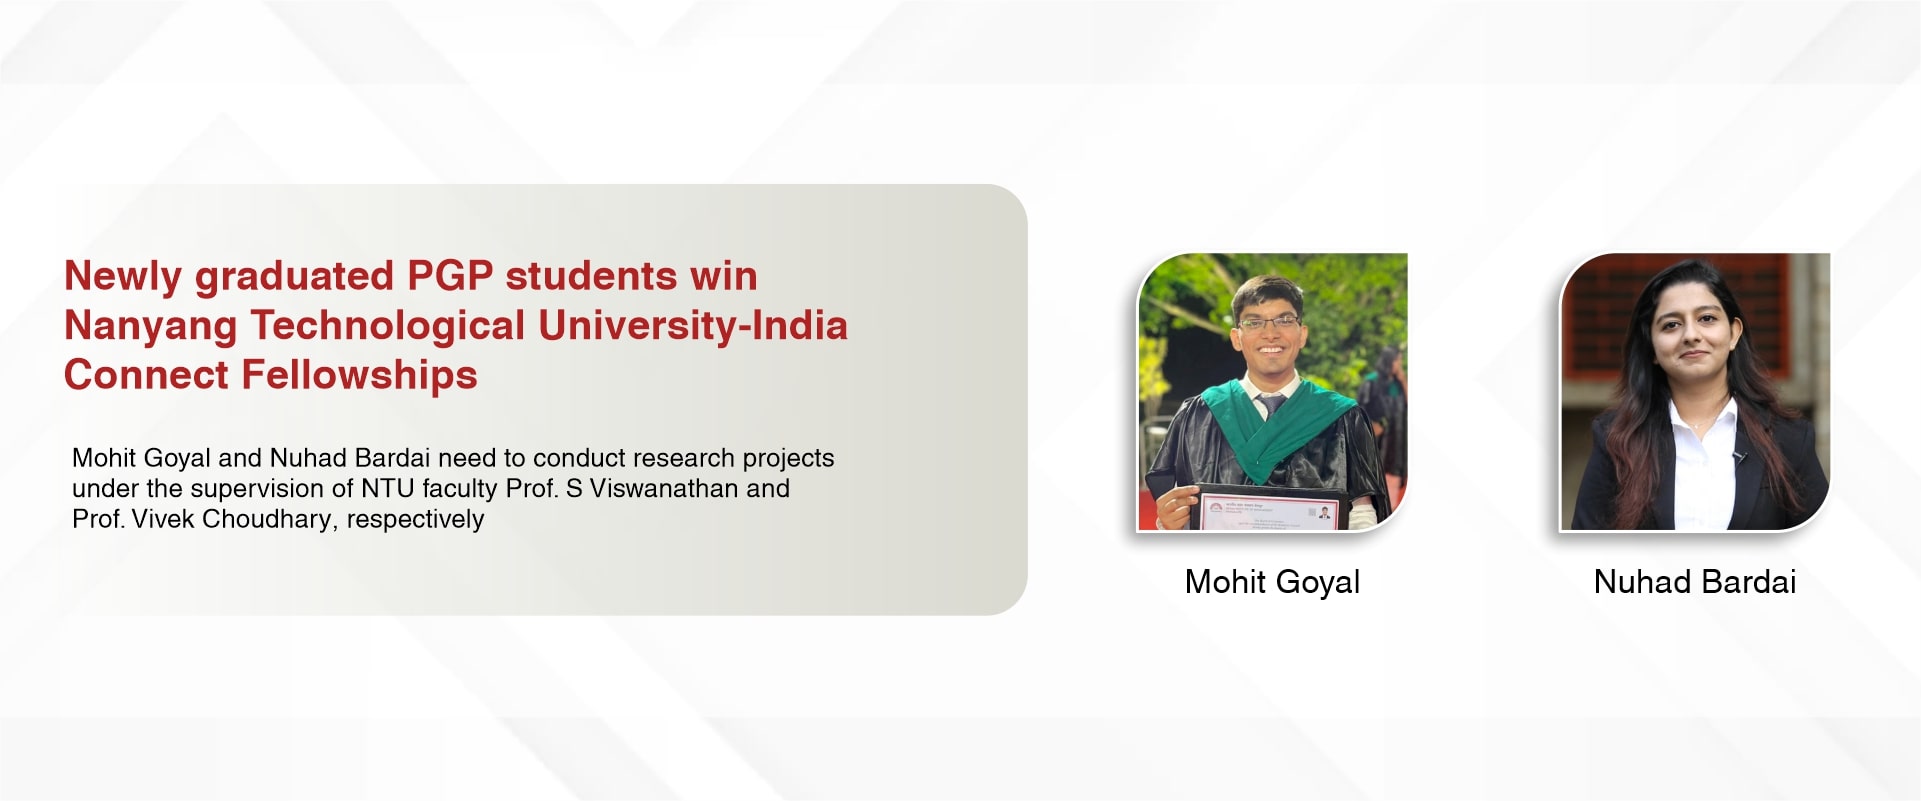 Newly graduated PGP students win Nanyang Technological University-India Connect Fellowships